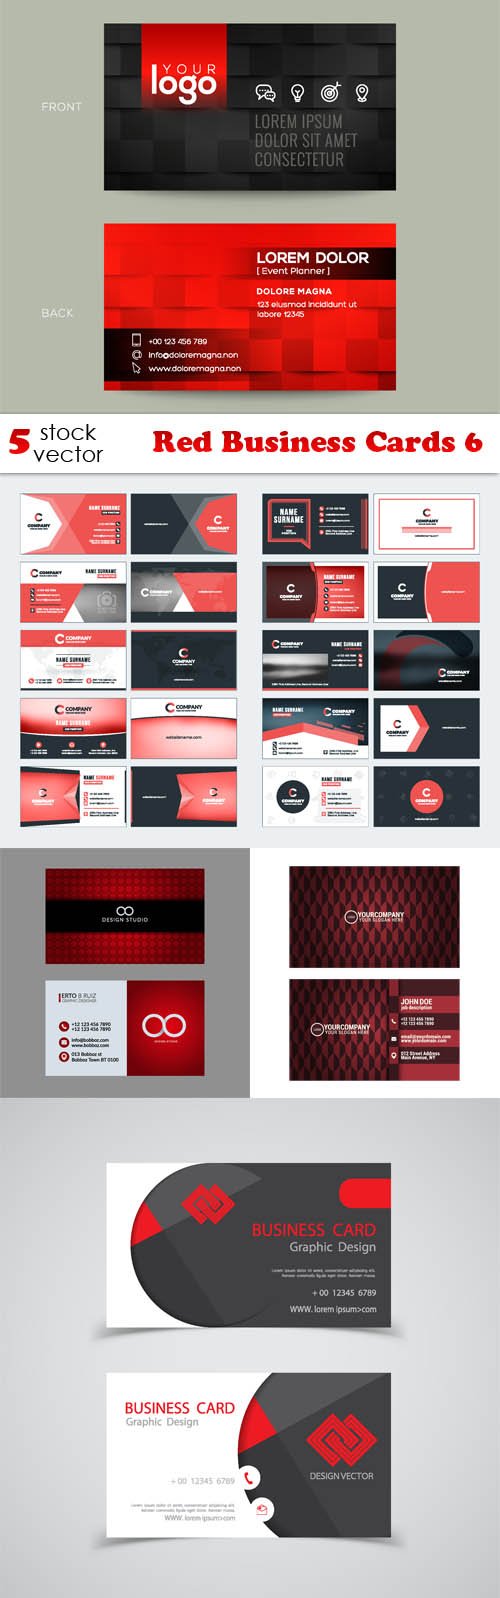 Vectors - Red Business Cards 6